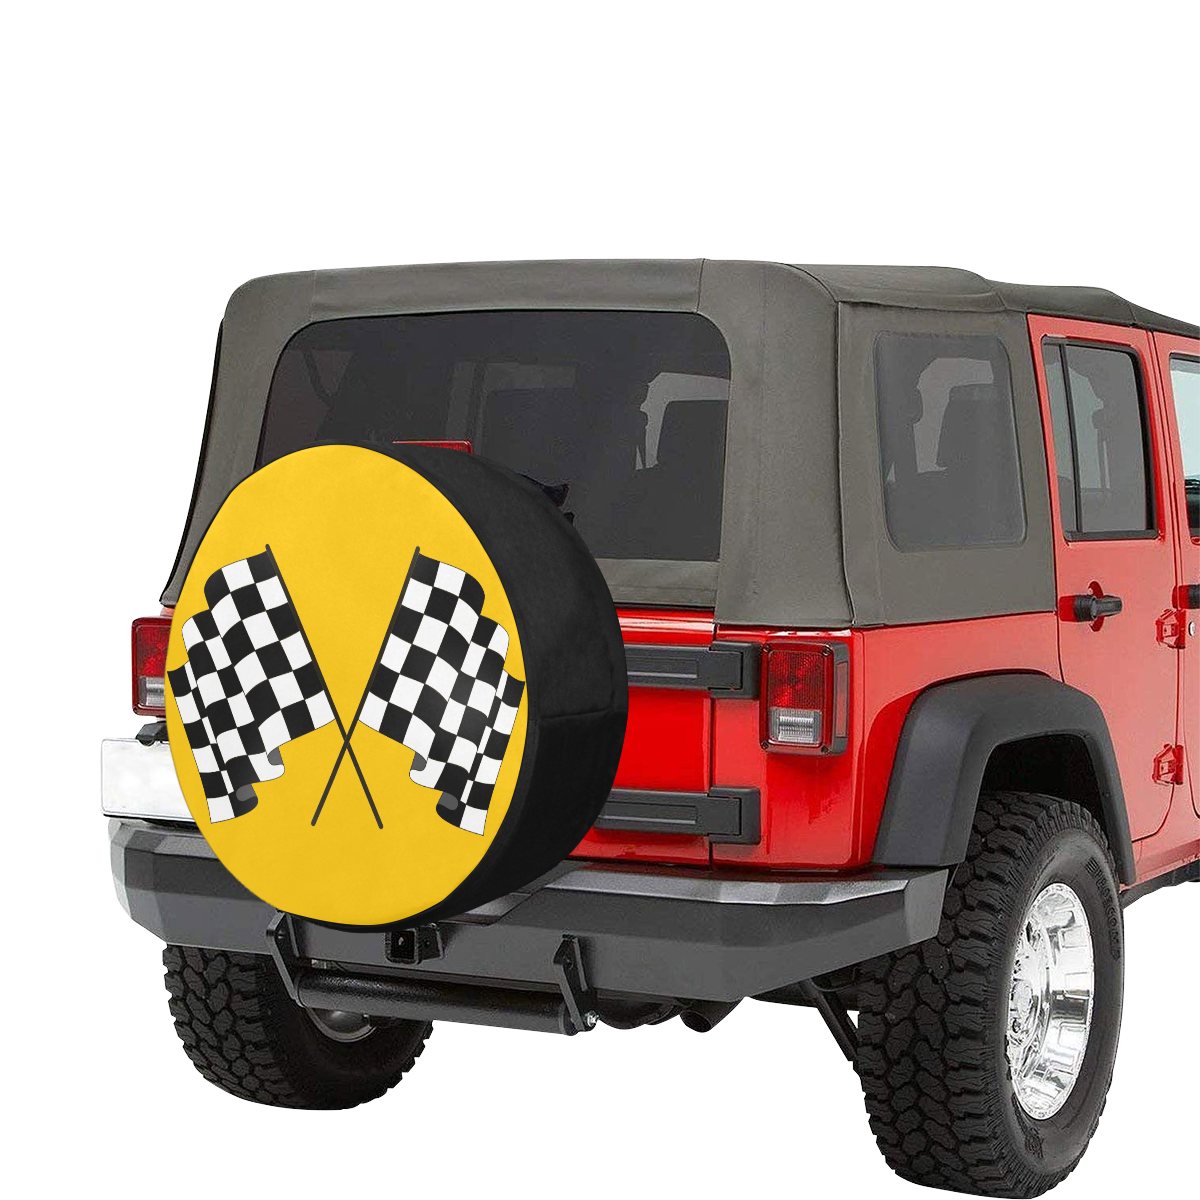 Checkered Race Flags on Black and Yellow 34 Inch Spare Tire Cover